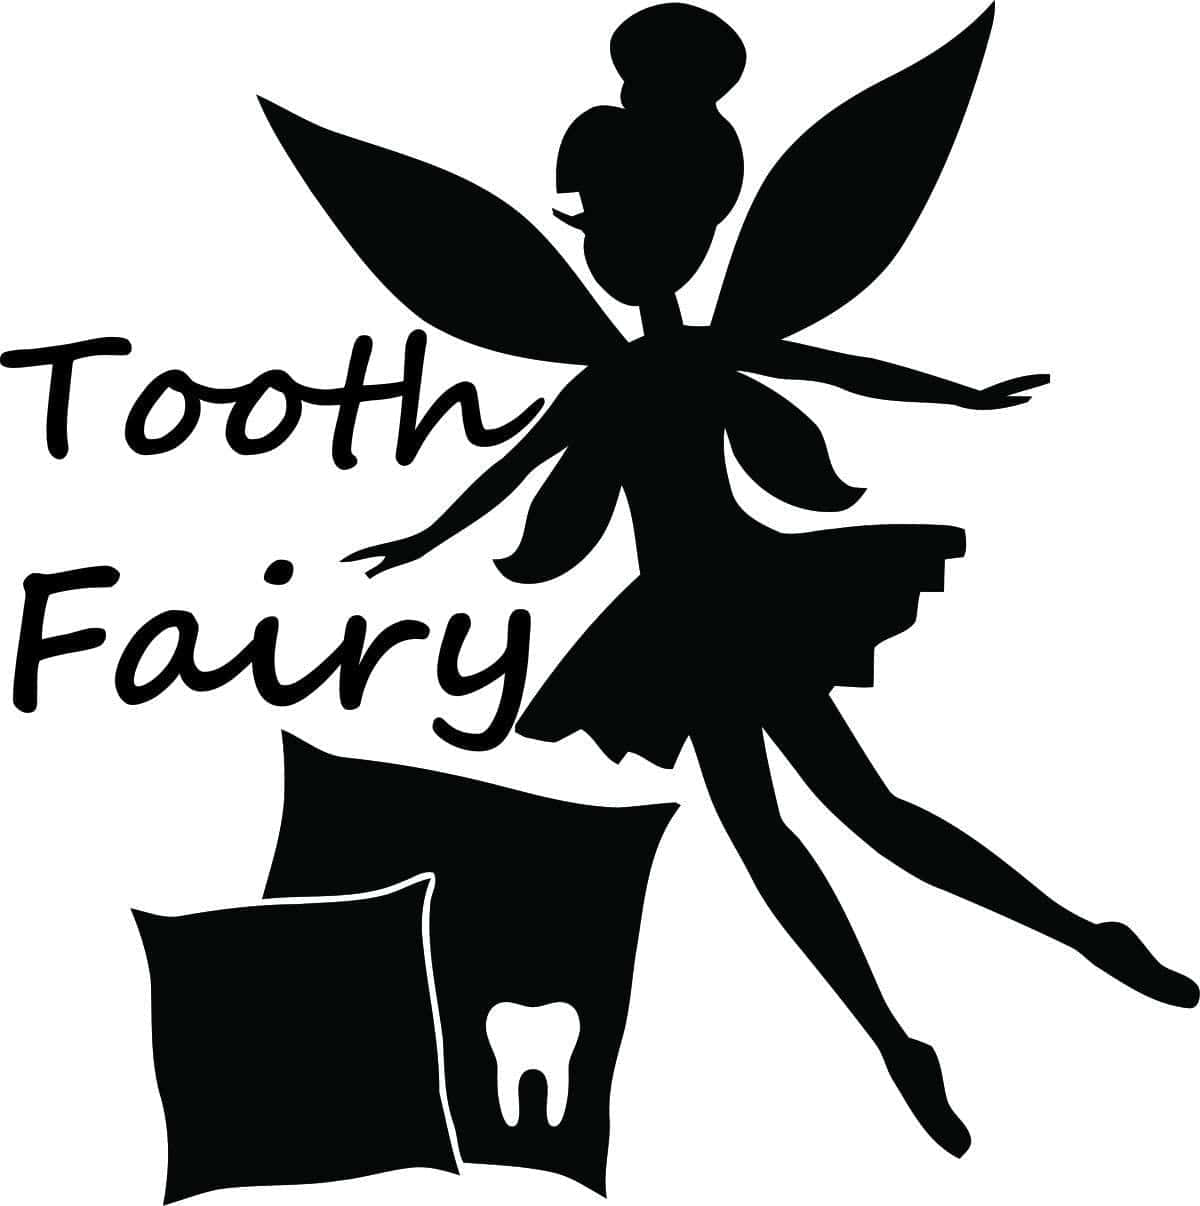 A smiling Tooth Fairy sets out to do her magical work